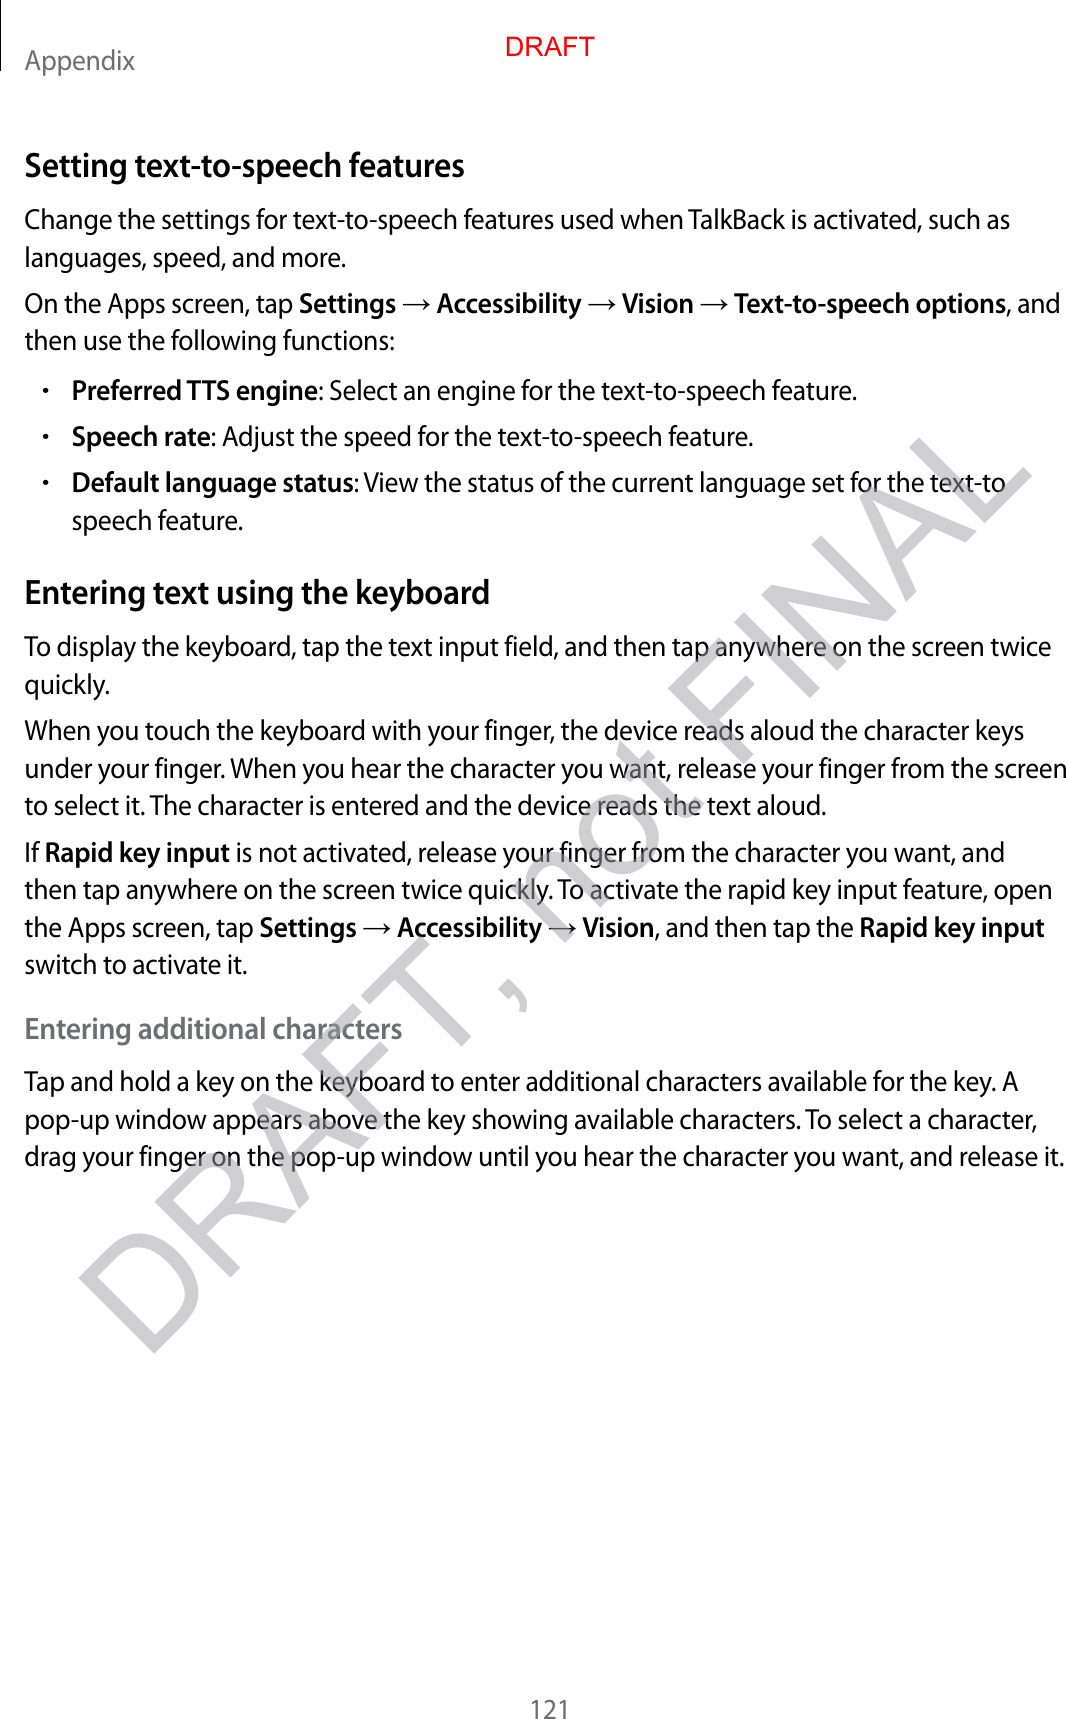 Appendix121Setting text-to-speech featuresChange the settings for text-to-speech features used when TalkBack is activated, such as languages, speed, and more.On the Apps screen, tap Settings  Accessibility  Vision  Text-to-speech options, and then use the following functions:•Preferred TTS engine: Select an engine for the text-to-speech feature.•Speech rate: Adjust the speed for the text-to-speech feature.•Default language status: View the status of the current language set for the text-tospeech feature.Entering text using the keyboardTo display the keyboard, tap the text input field, and then tap anywhere on the screen twice quickly.When you touch the keyboard with your finger, the device reads aloud the character keys under your finger. When you hear the character you want, release your finger from the screen to select it. The character is entered and the device reads the text aloud.If Rapid key input is not activated, release your finger from the character you want, and then tap anywhere on the screen twice quickly. To activate the rapid key input feature, open the Apps screen, tap Settings  Accessibility  Vision, and then tap the Rapid key input switch to activate it.Entering additional charactersTap and hold a key on the keyboard to enter additional characters available for the key. A pop-up window appears above the key showing available characters. To select a character, drag your finger on the pop-up window until you hear the character you want, and release it.DRAFTDRAFT, not FINAL